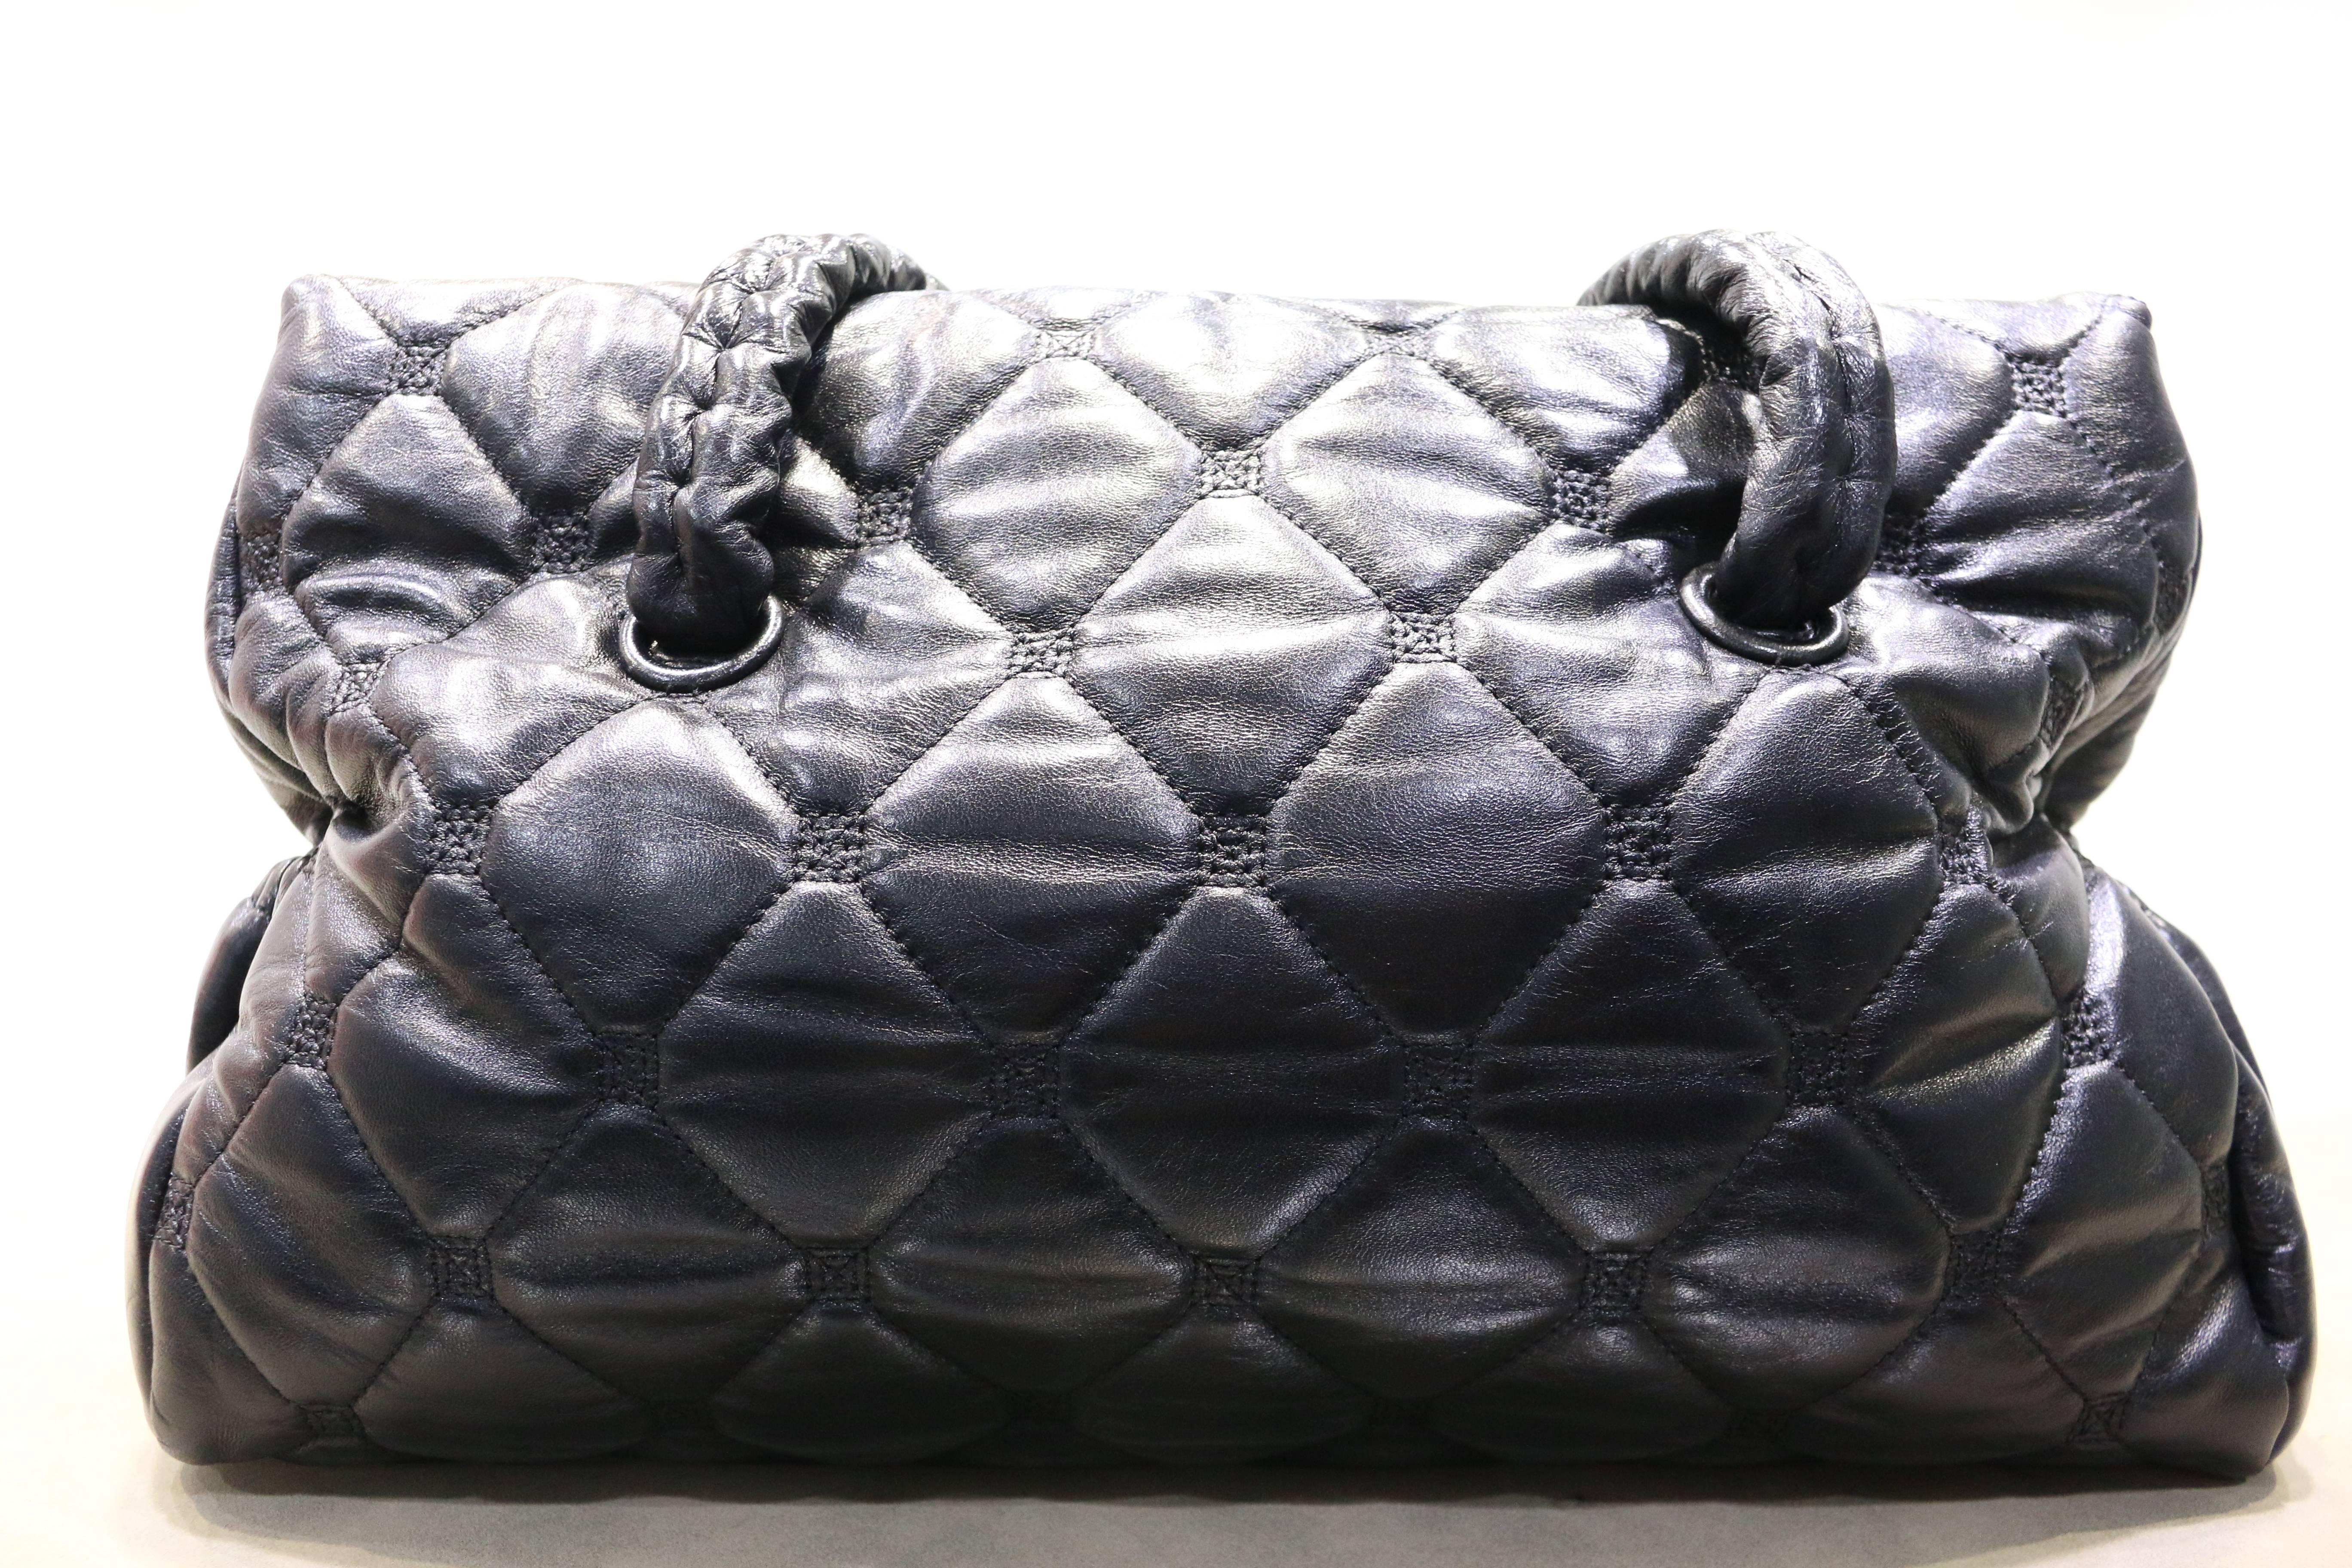 - Chanel black quilted textured lambskin leather double straps handbag from year 2008 to 2009. Featuring two side pockets with a silver satin leather interior and zipper pocket. 

- Made in Italy. 

- Length 37cm x Height 23cm x Width 15cm. Handle: